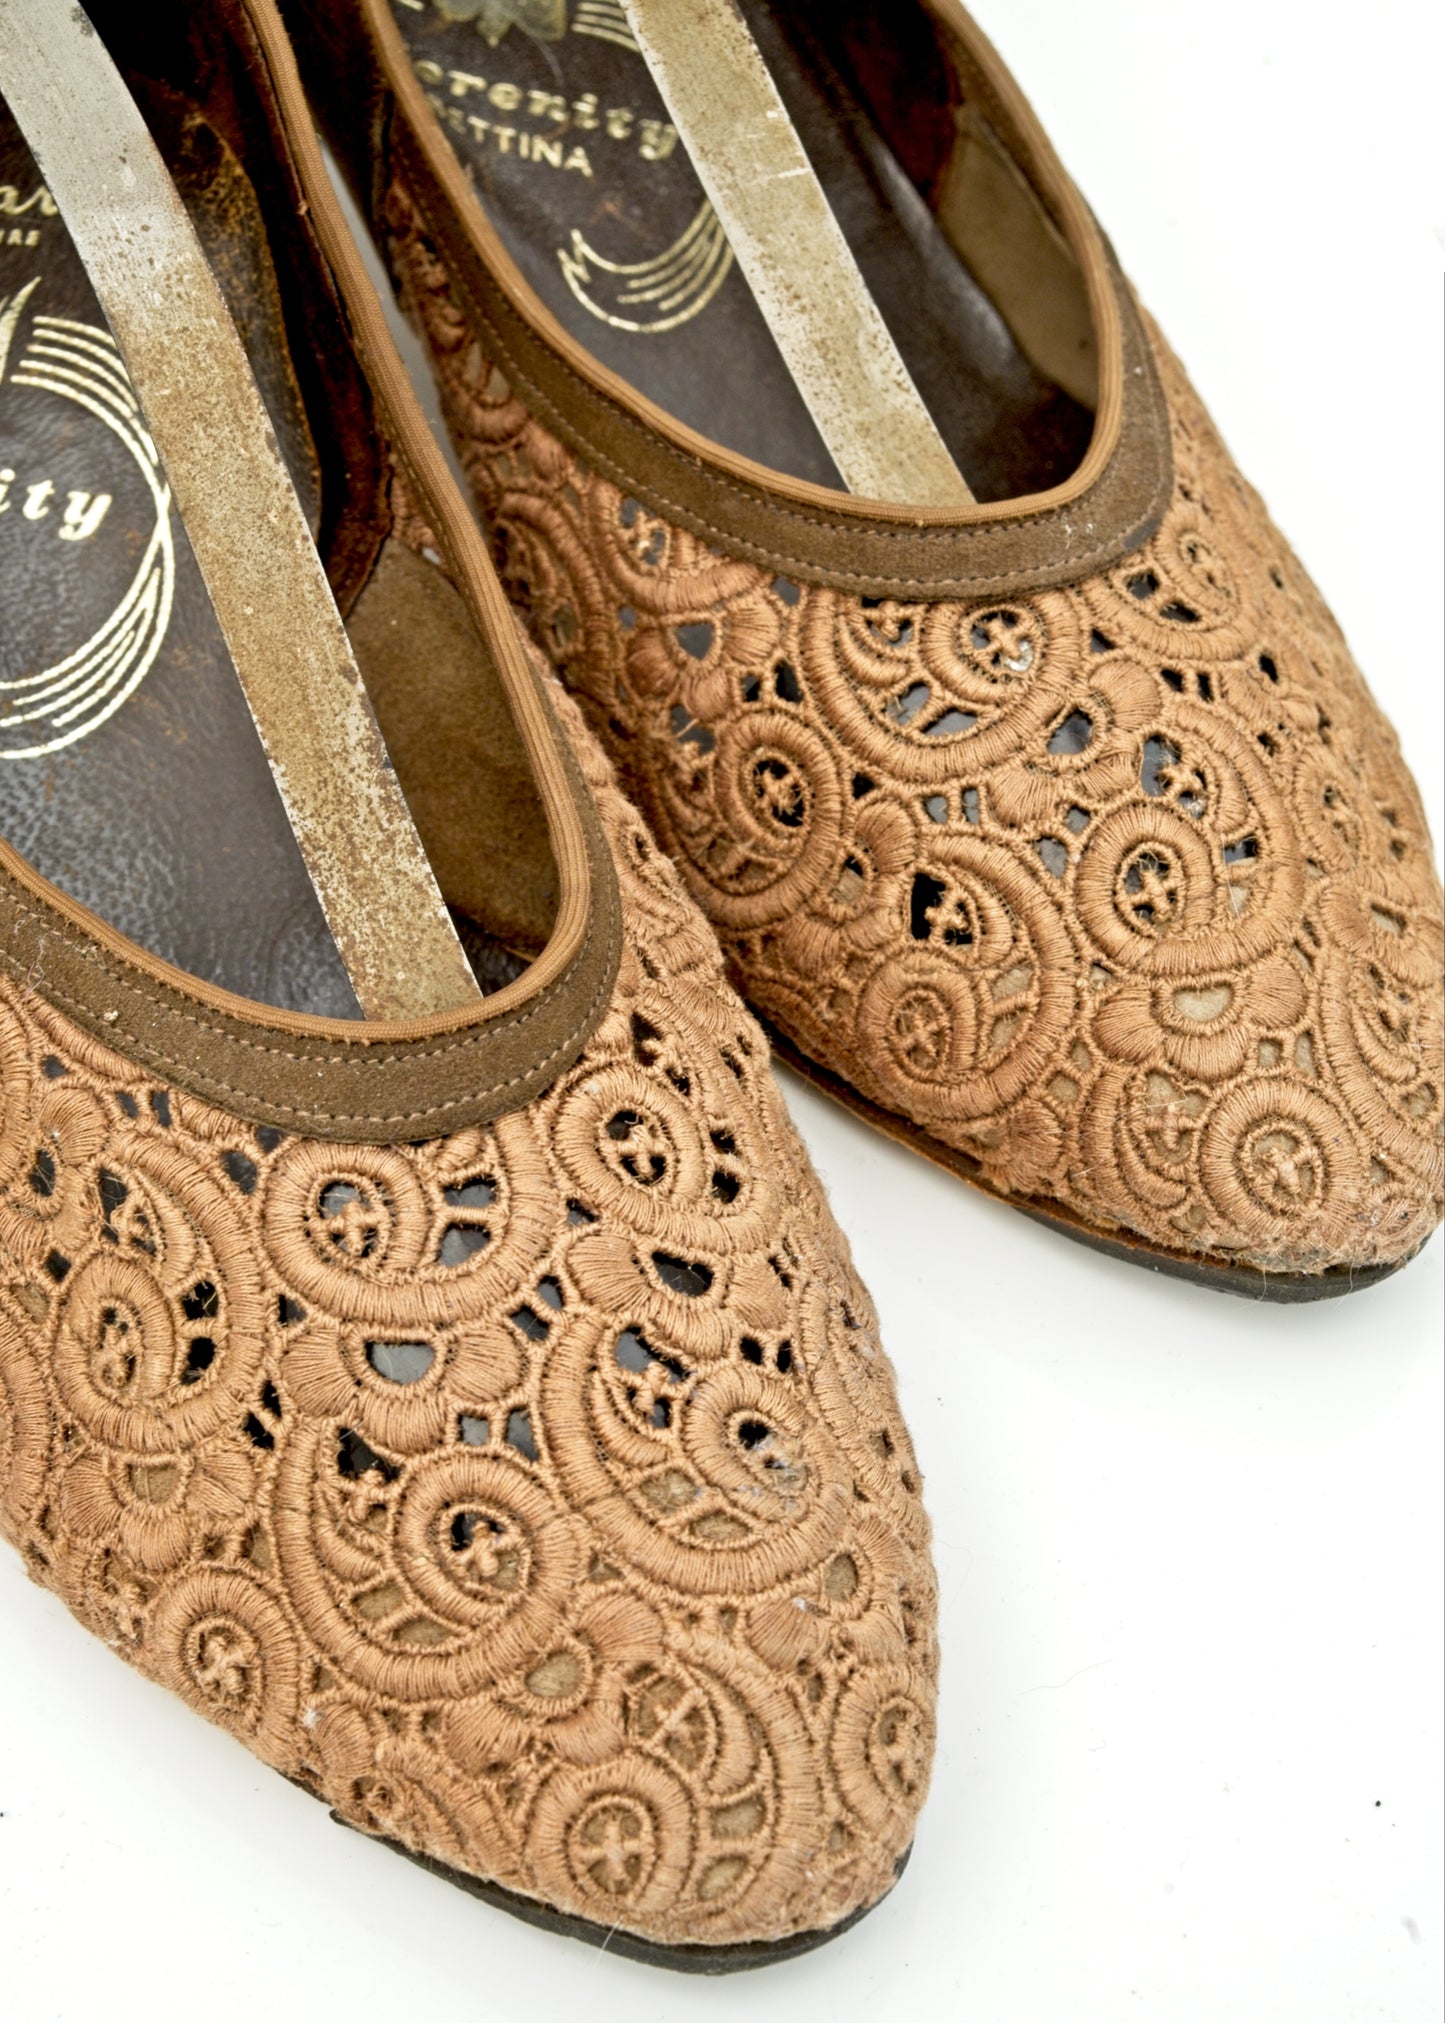 1950s Vintage Brown Suede and Broderie Lace Pumps Shoes • Size 6